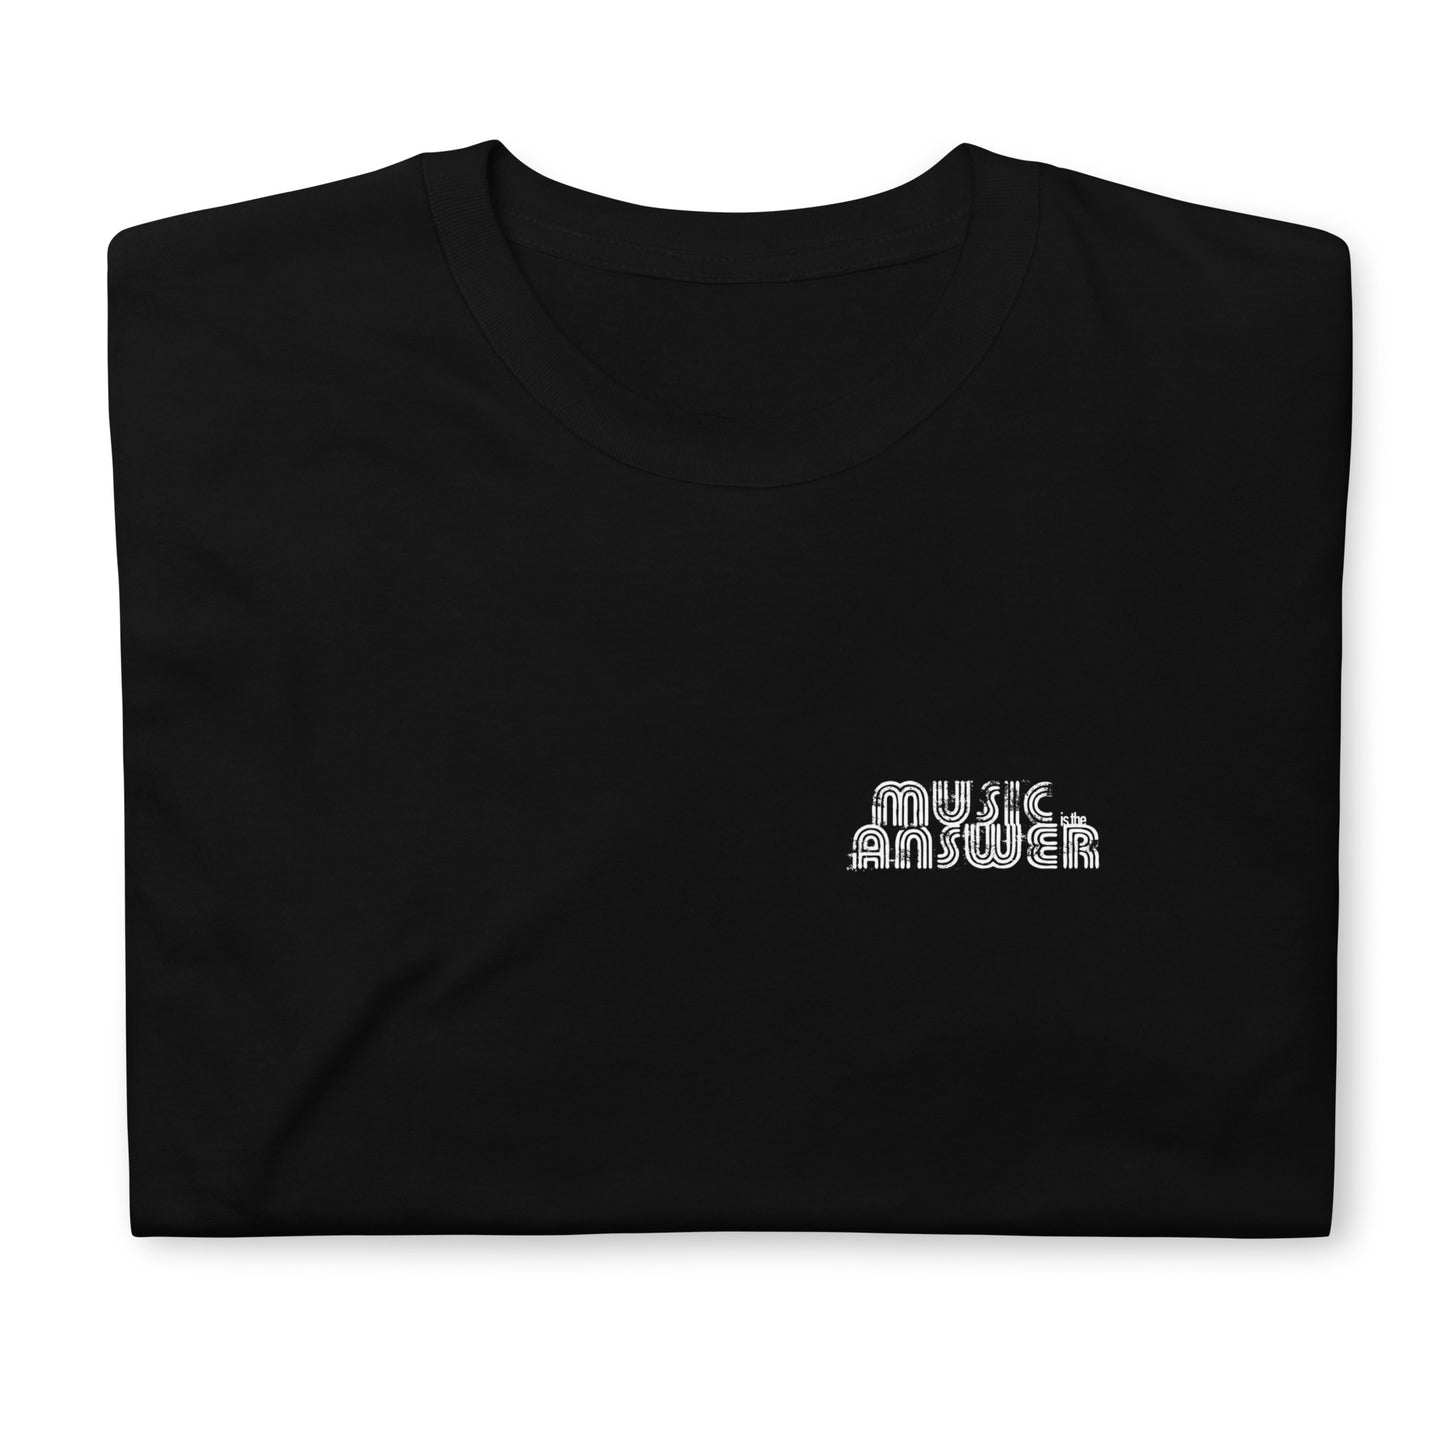 Music is the Answer unisex T-shirt